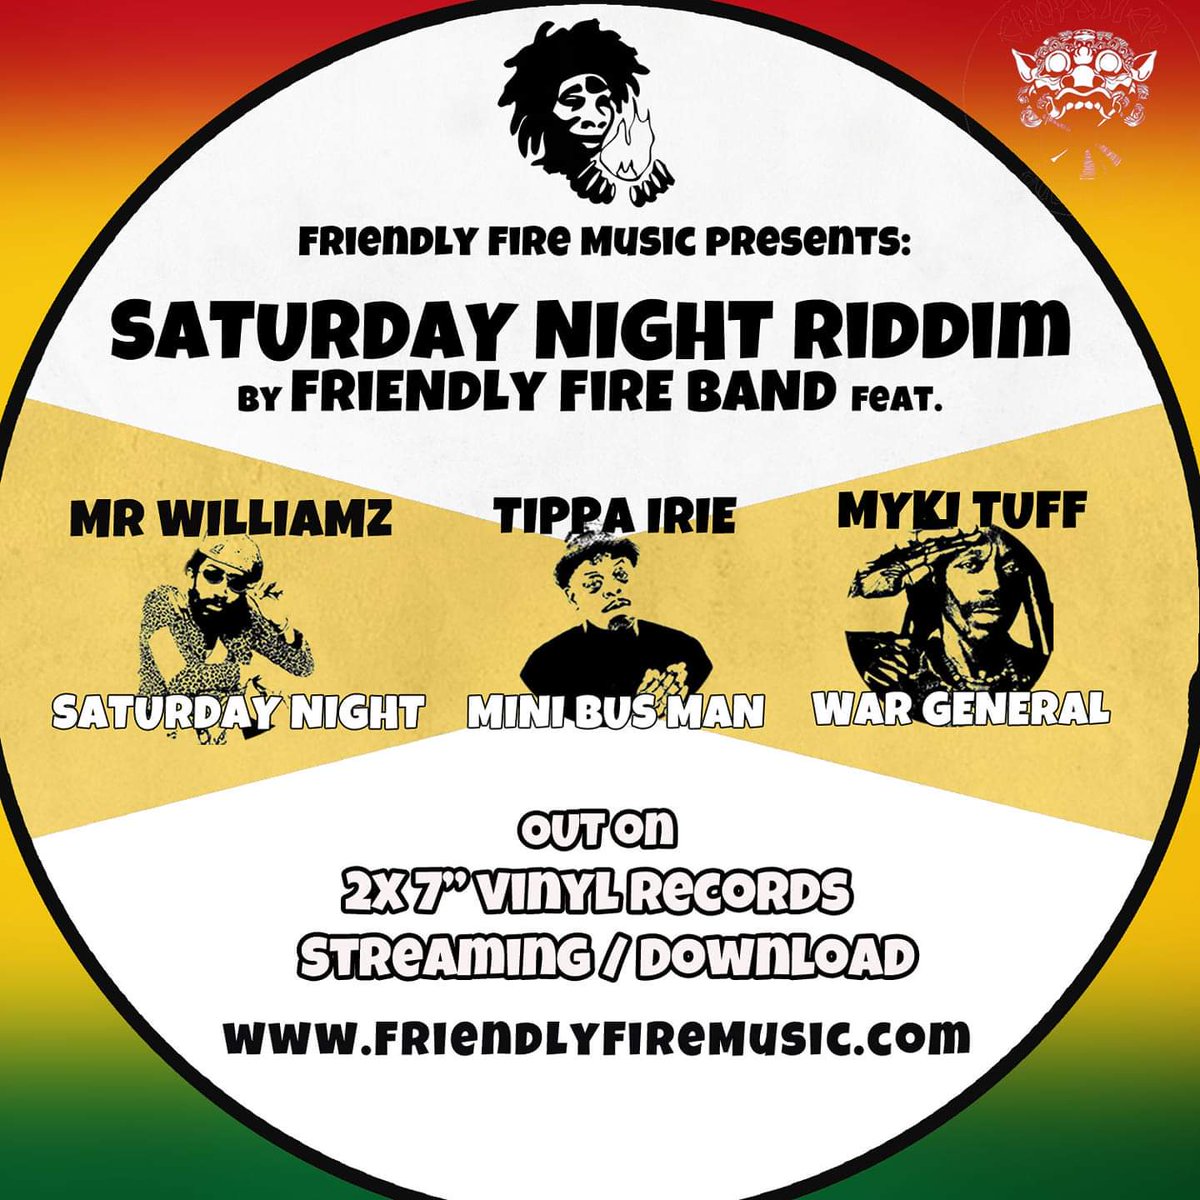 Friendly Fire Band (Reggae) feat. MR.WILLIAMZ / Tippa Irie / Myki Tuff - Reggae Artiste  released on Friendly Fire Music - Label & Studio, produced by Robin Giorno 

See link below to order your copy

👇🏾
 bit.ly/minibus7